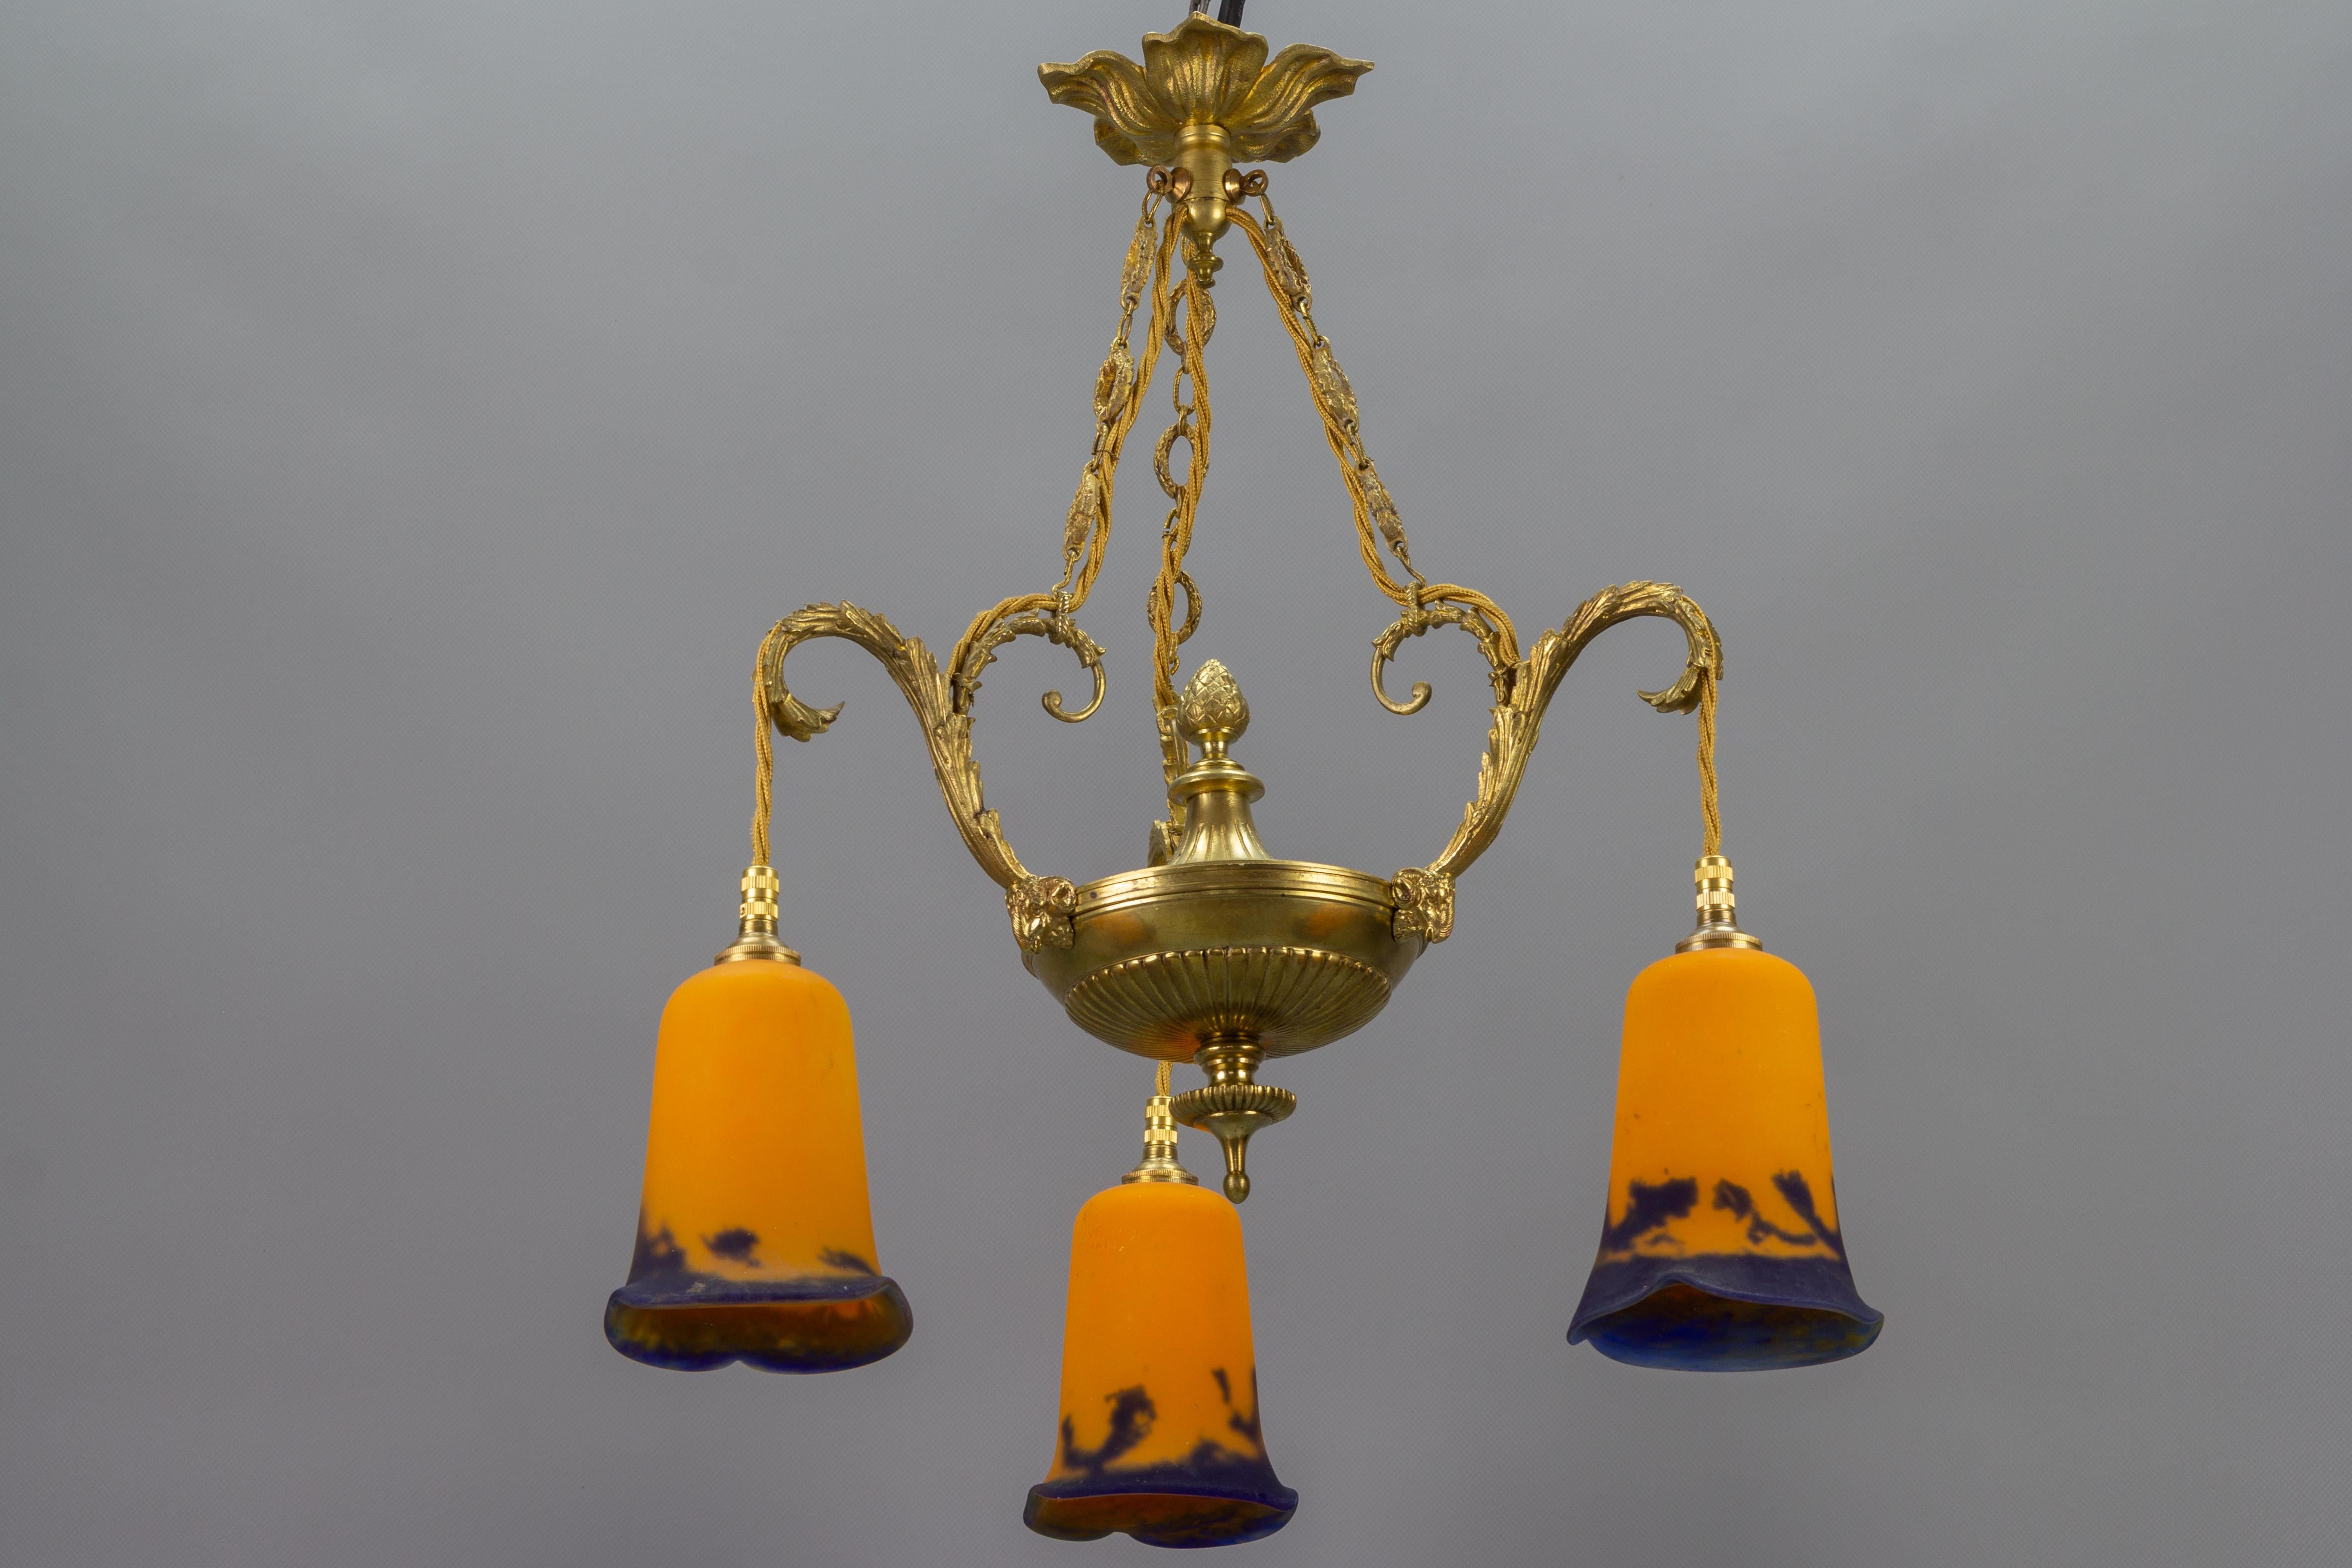 Beautiful French Louis XVI style three-light bronze chandelier with orange and blue pate de Verre glass lampshades signed ”Noverdy France” by Jean Noverdy. An ornate bronze fixture decorated with ram heads and acanthus leaf scrolls.
Three sockets